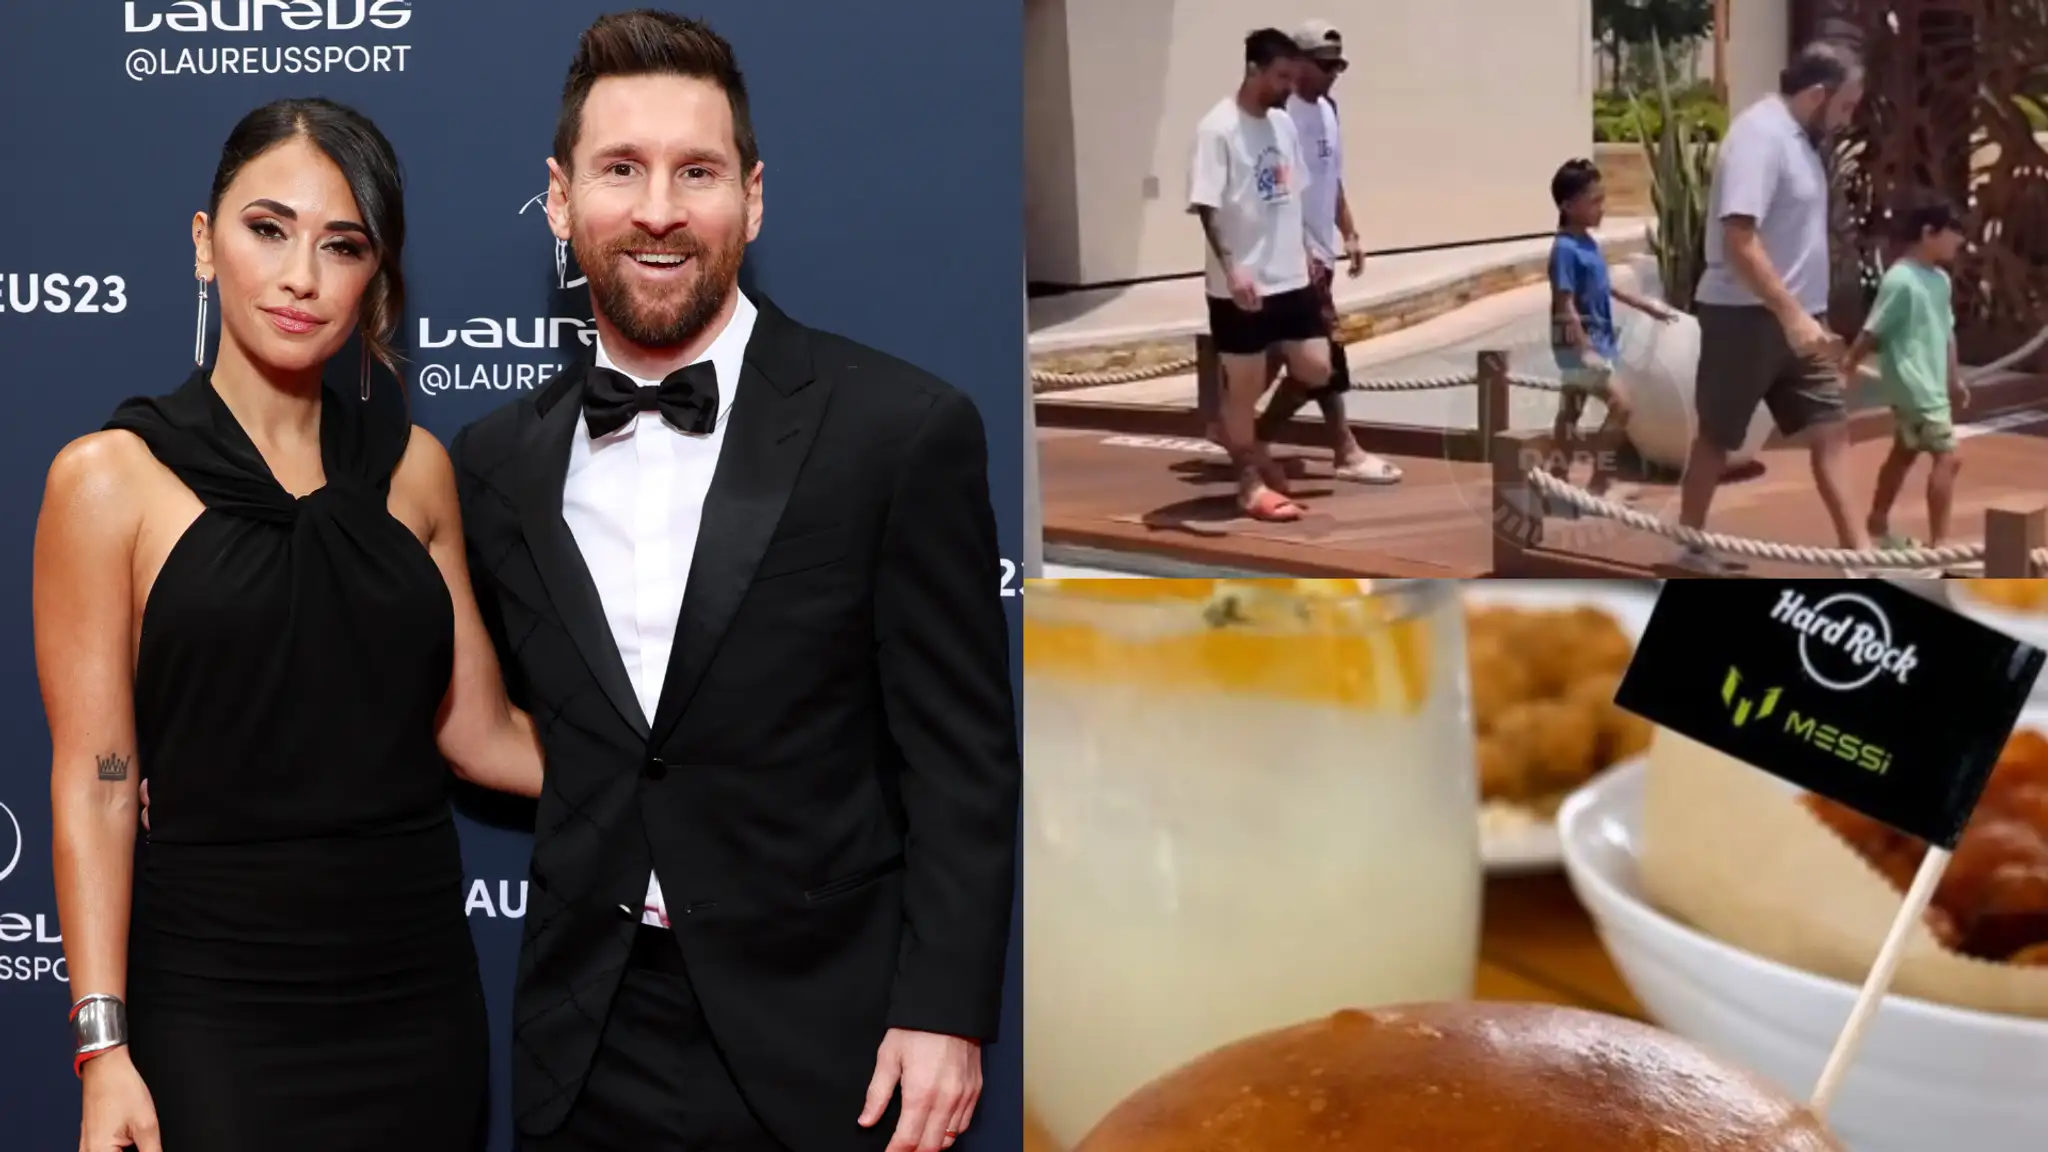 VIDEO: Tasty! Lionel Messi & wife Antonela Roccuzzo head to Hard Rock Cafe to try Inter Miami superstar's signature burger